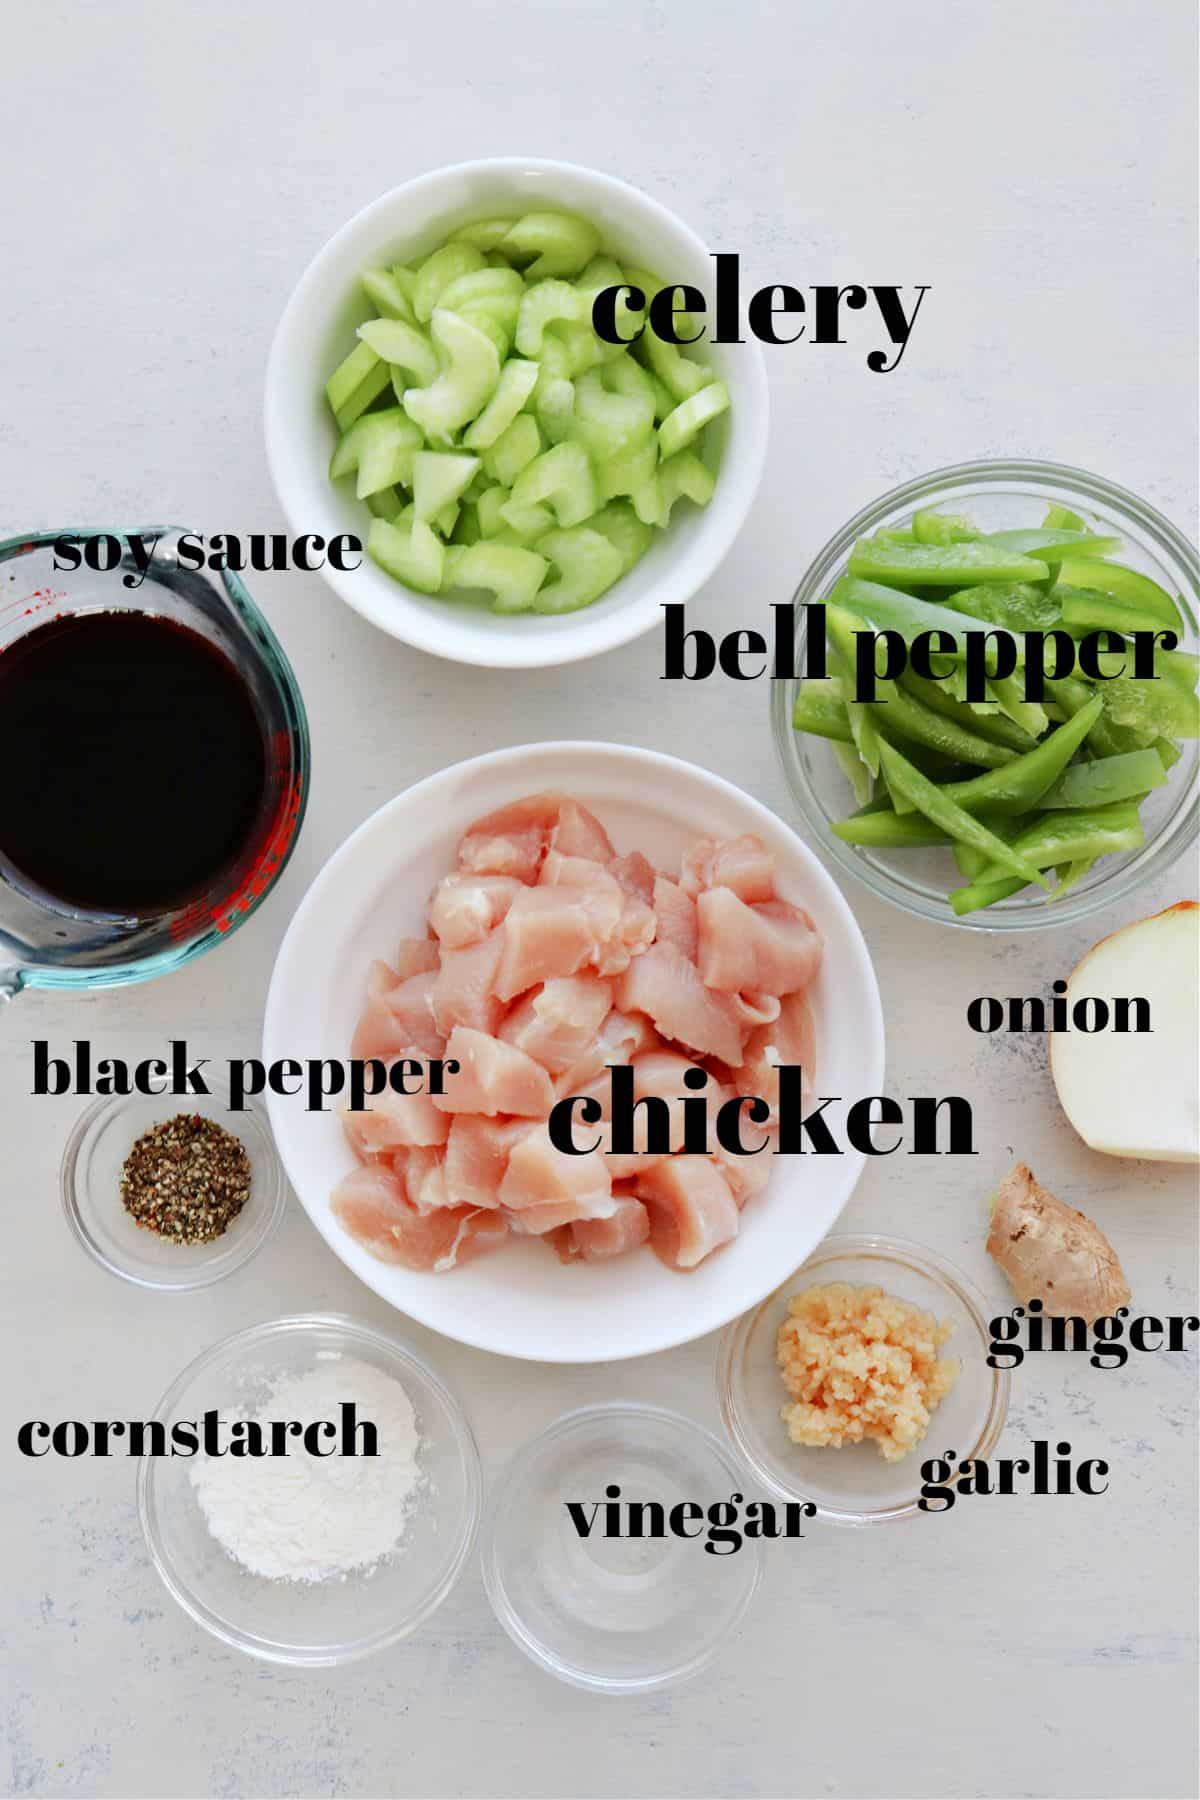 Ingredients for black pepper chicken on a board.